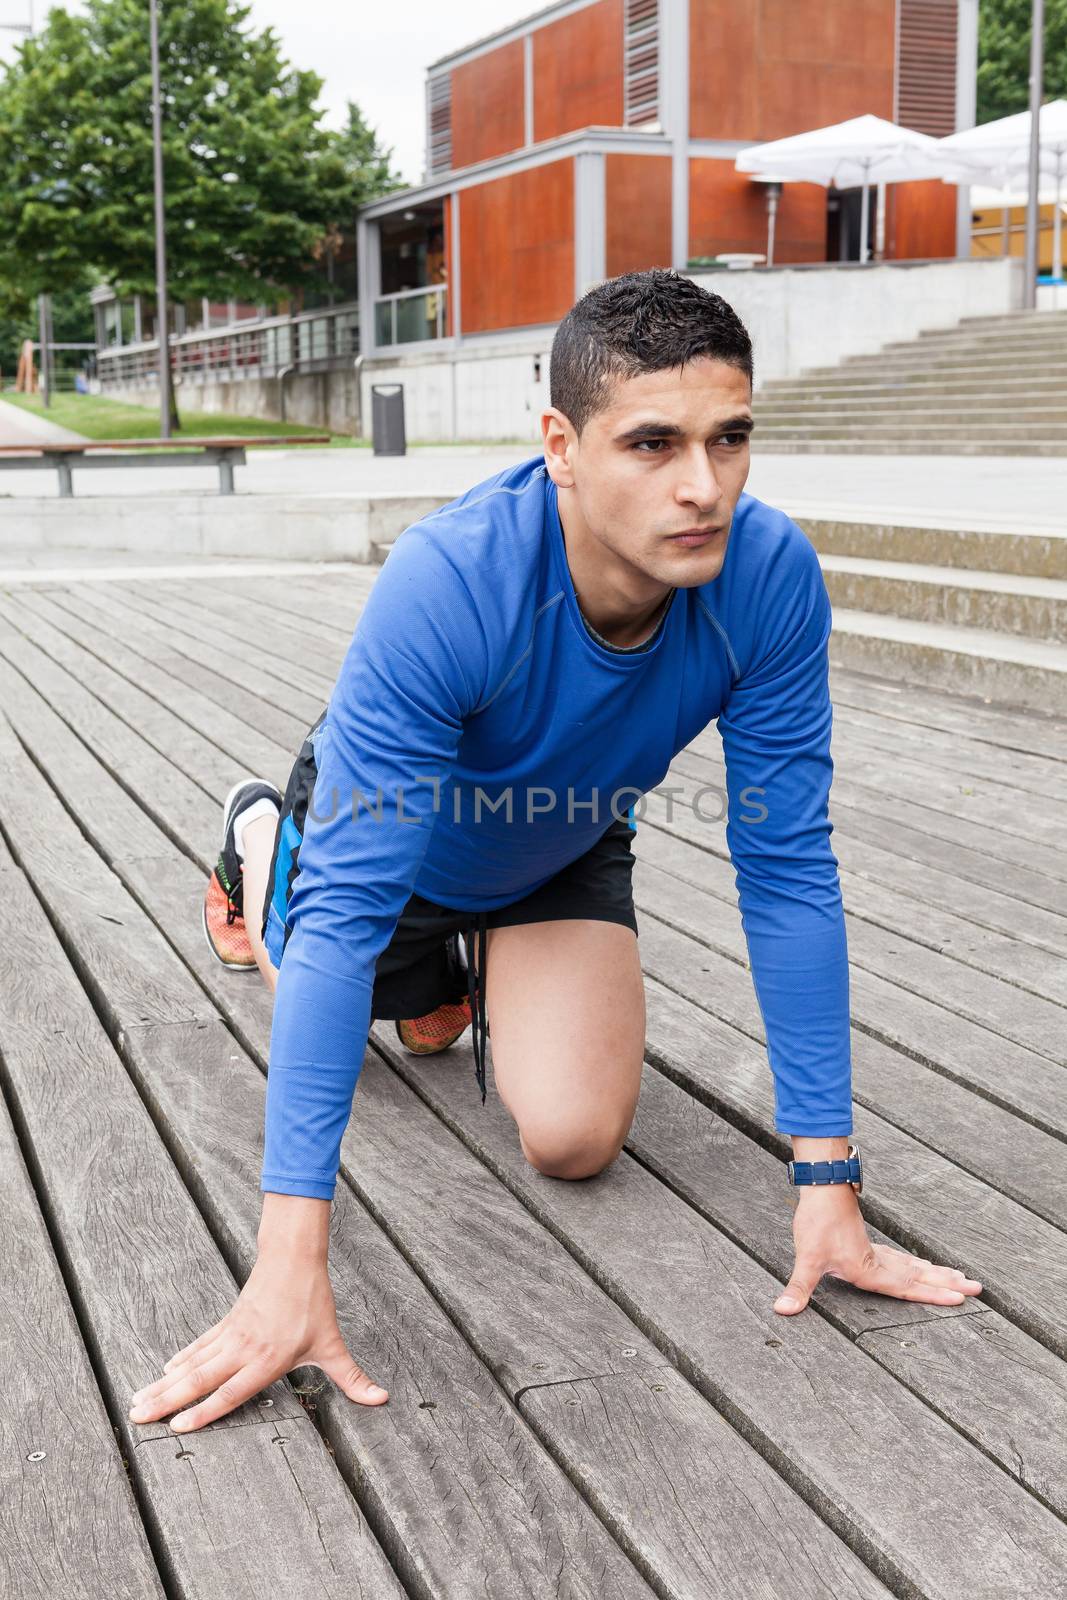 Young athlete in starting position sprint trainning in a wood floor outdoor